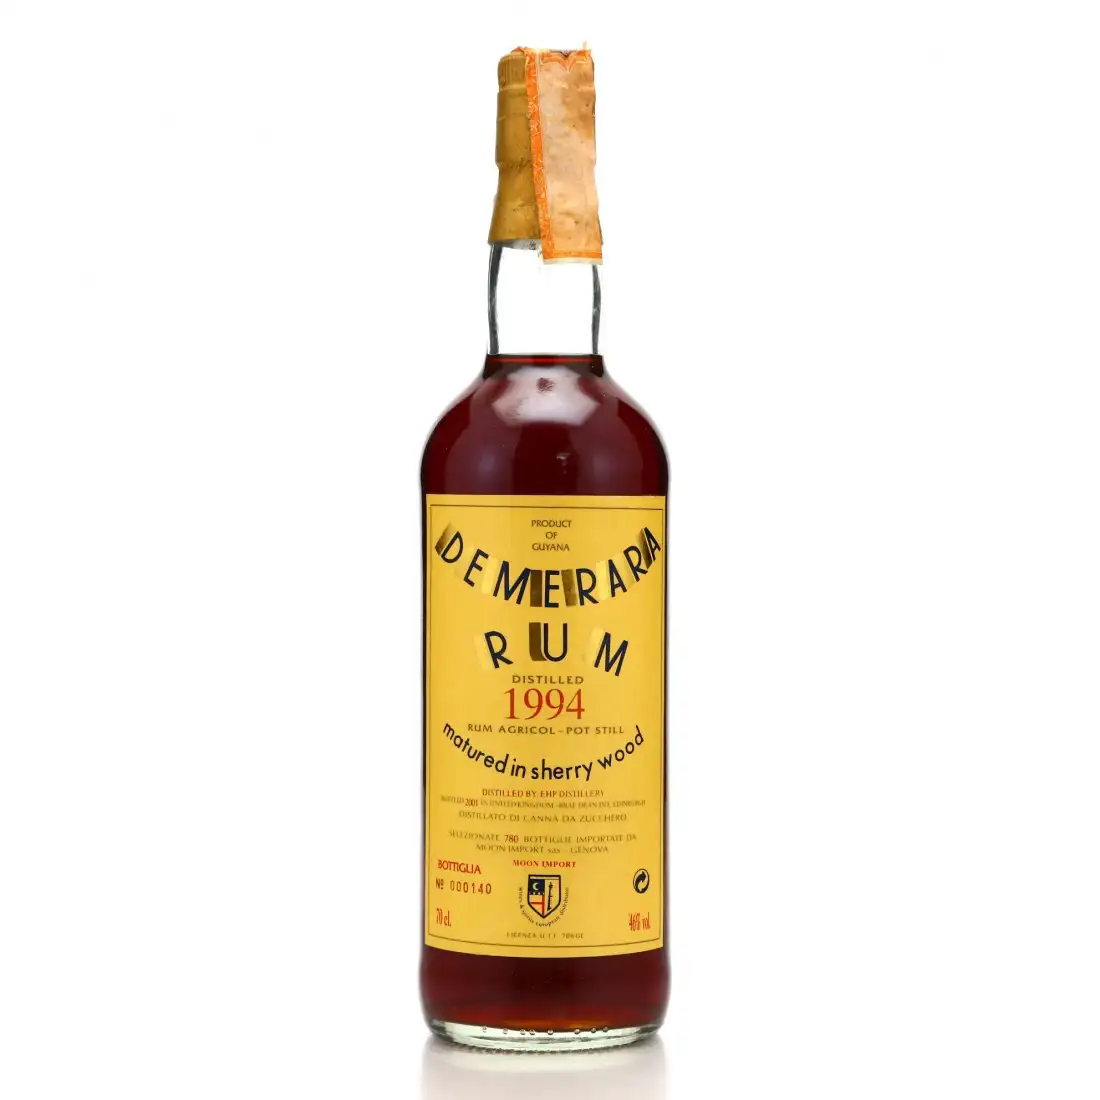 Image of the front of the bottle of the rum Demerara Rum EHP